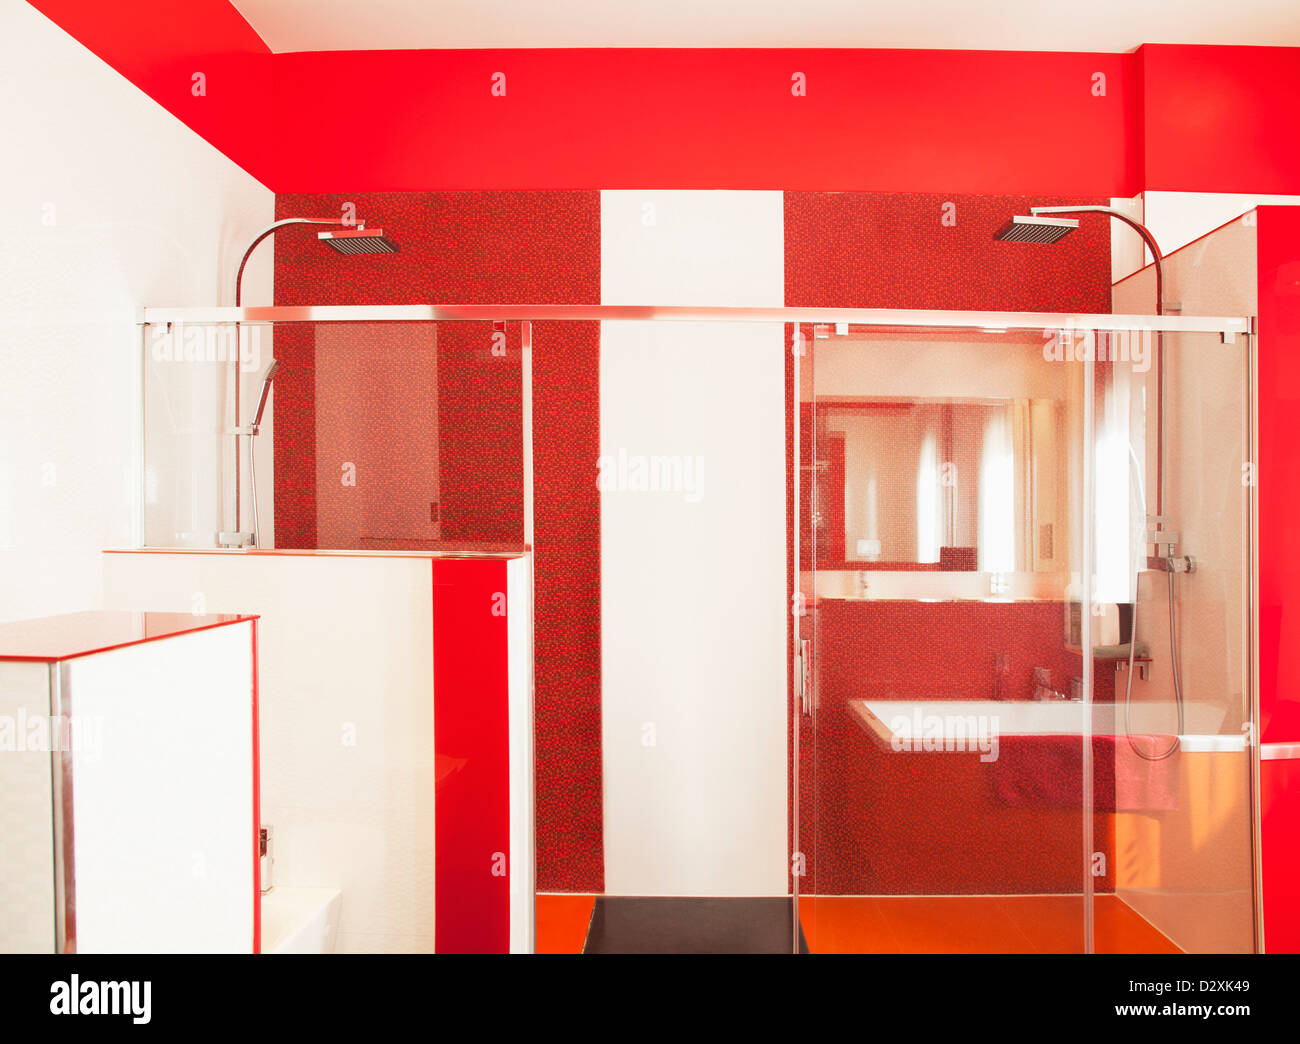 Red and white luxury modern bathroom Stock Photo